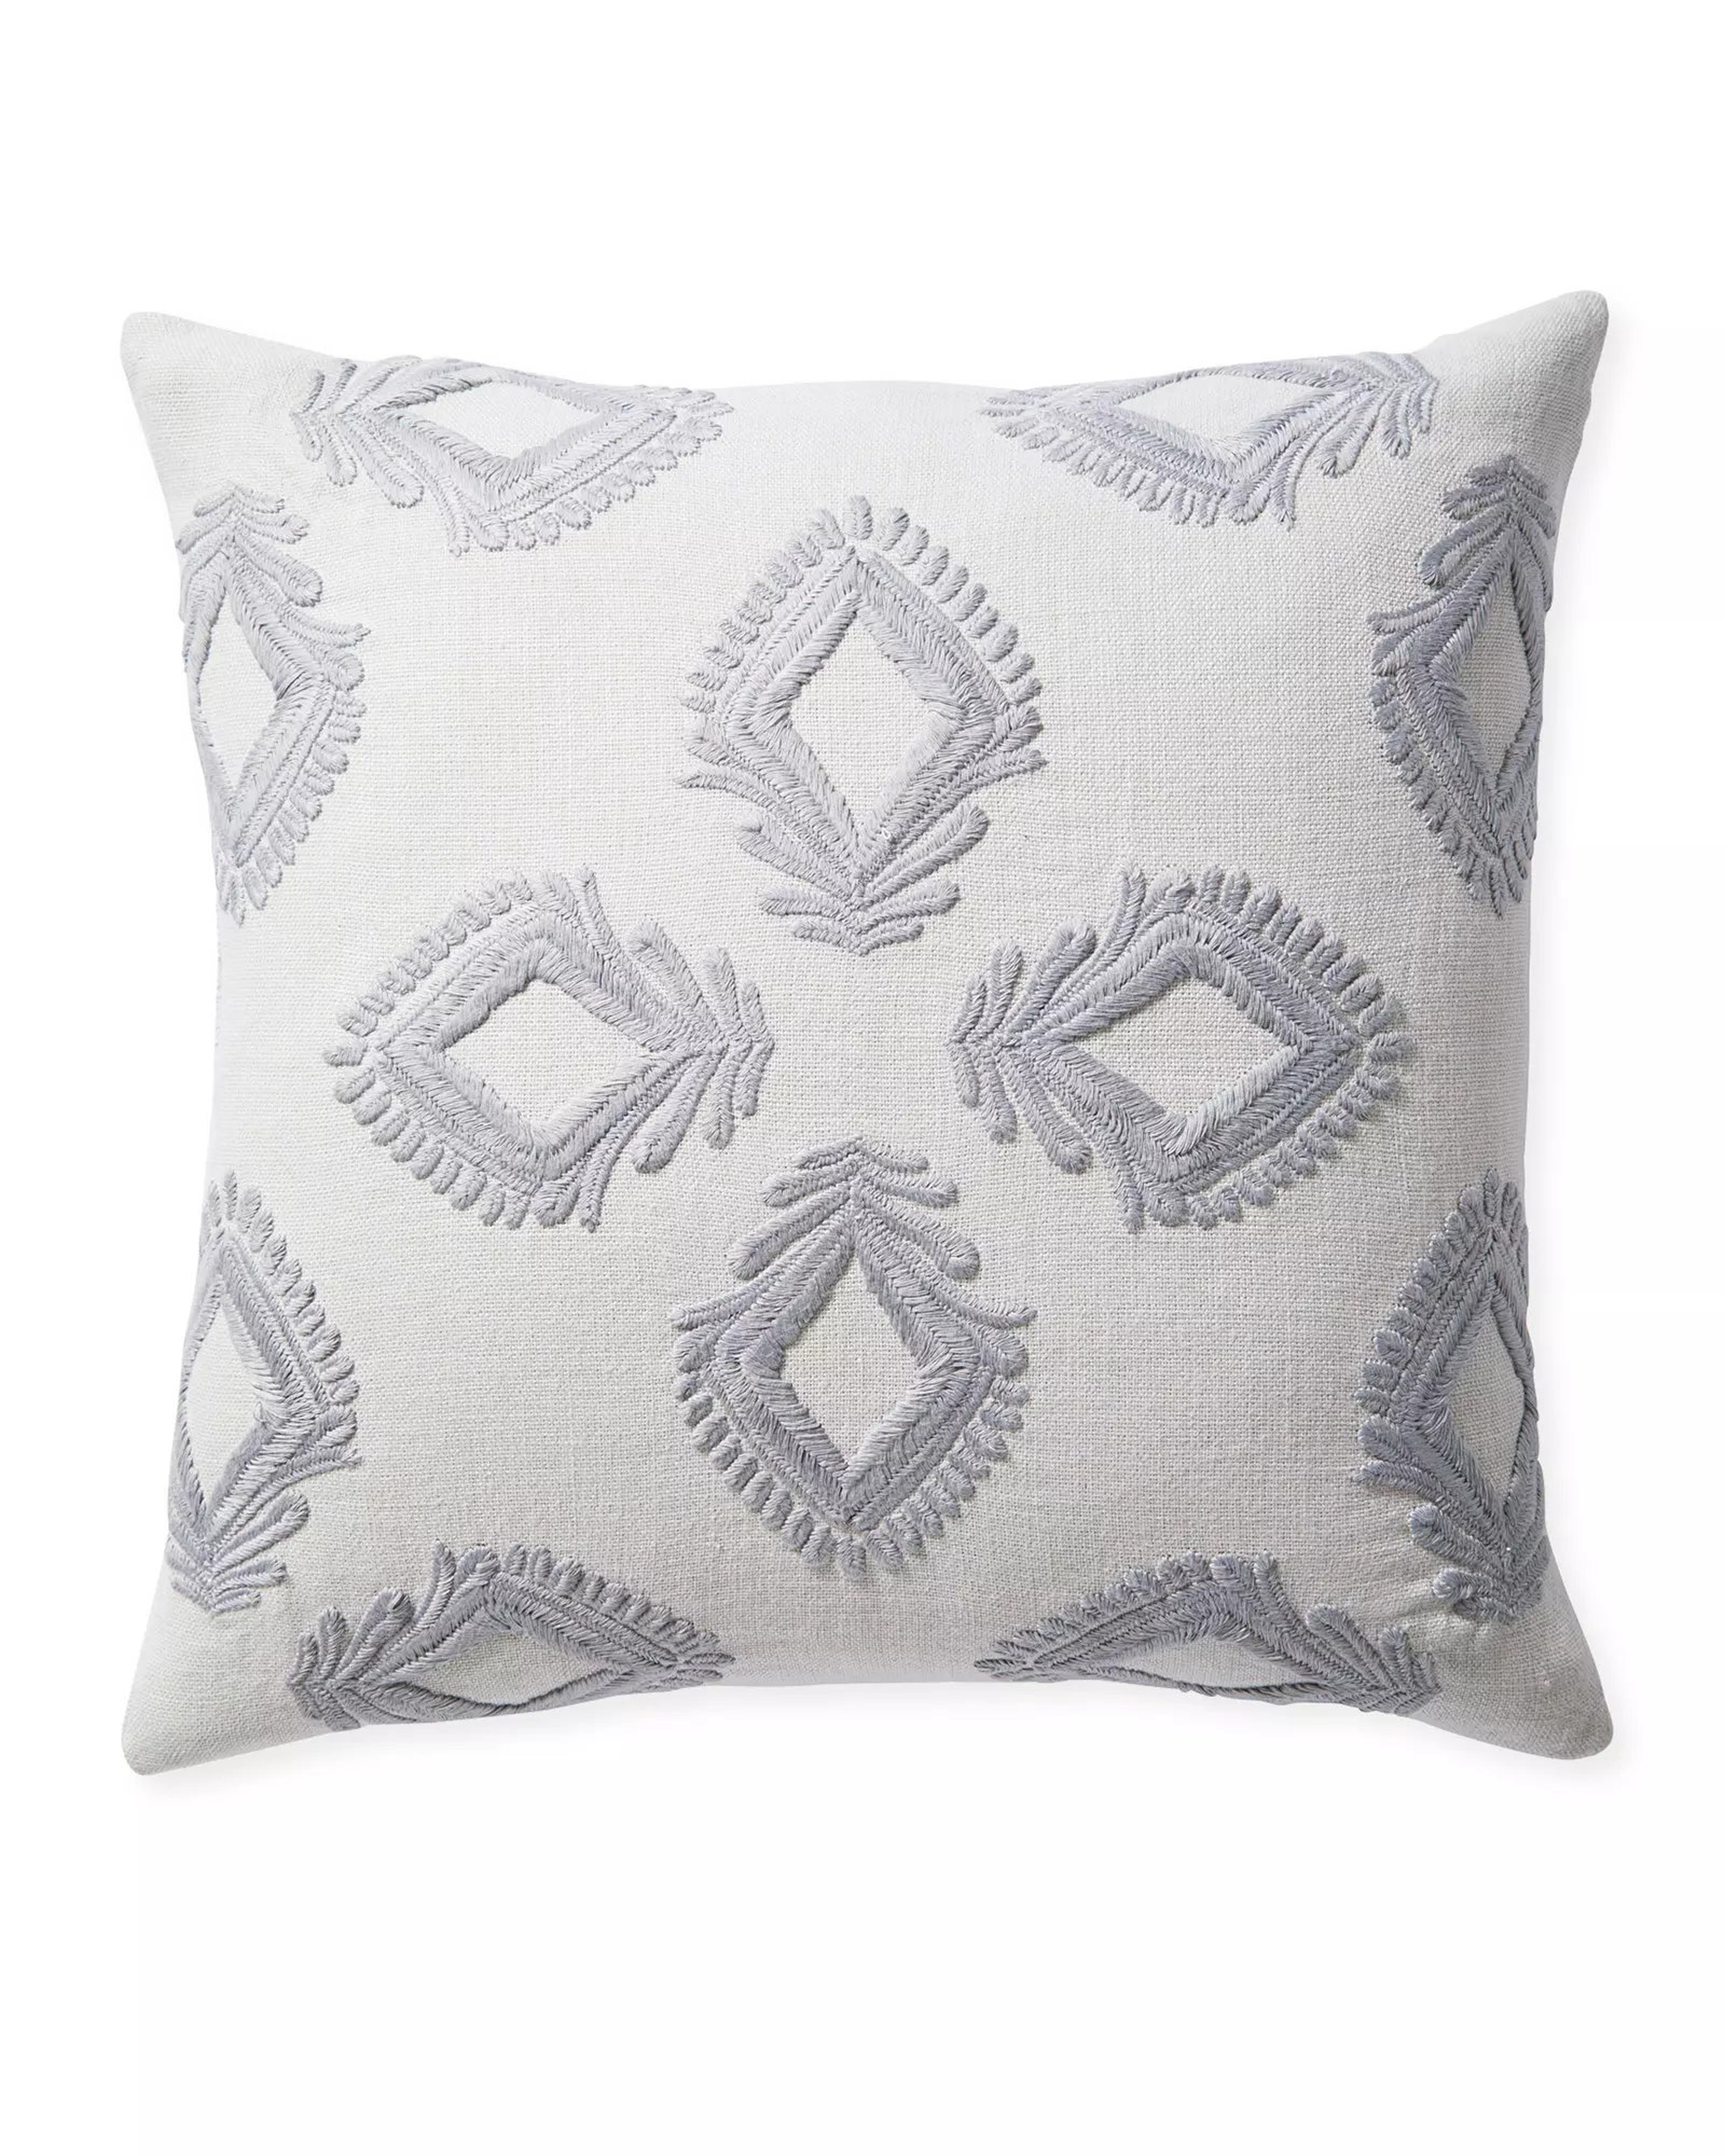 Leighton Pillow Cover - Fog - 24" x 24" - Insert Sold Separately - Serena and Lily